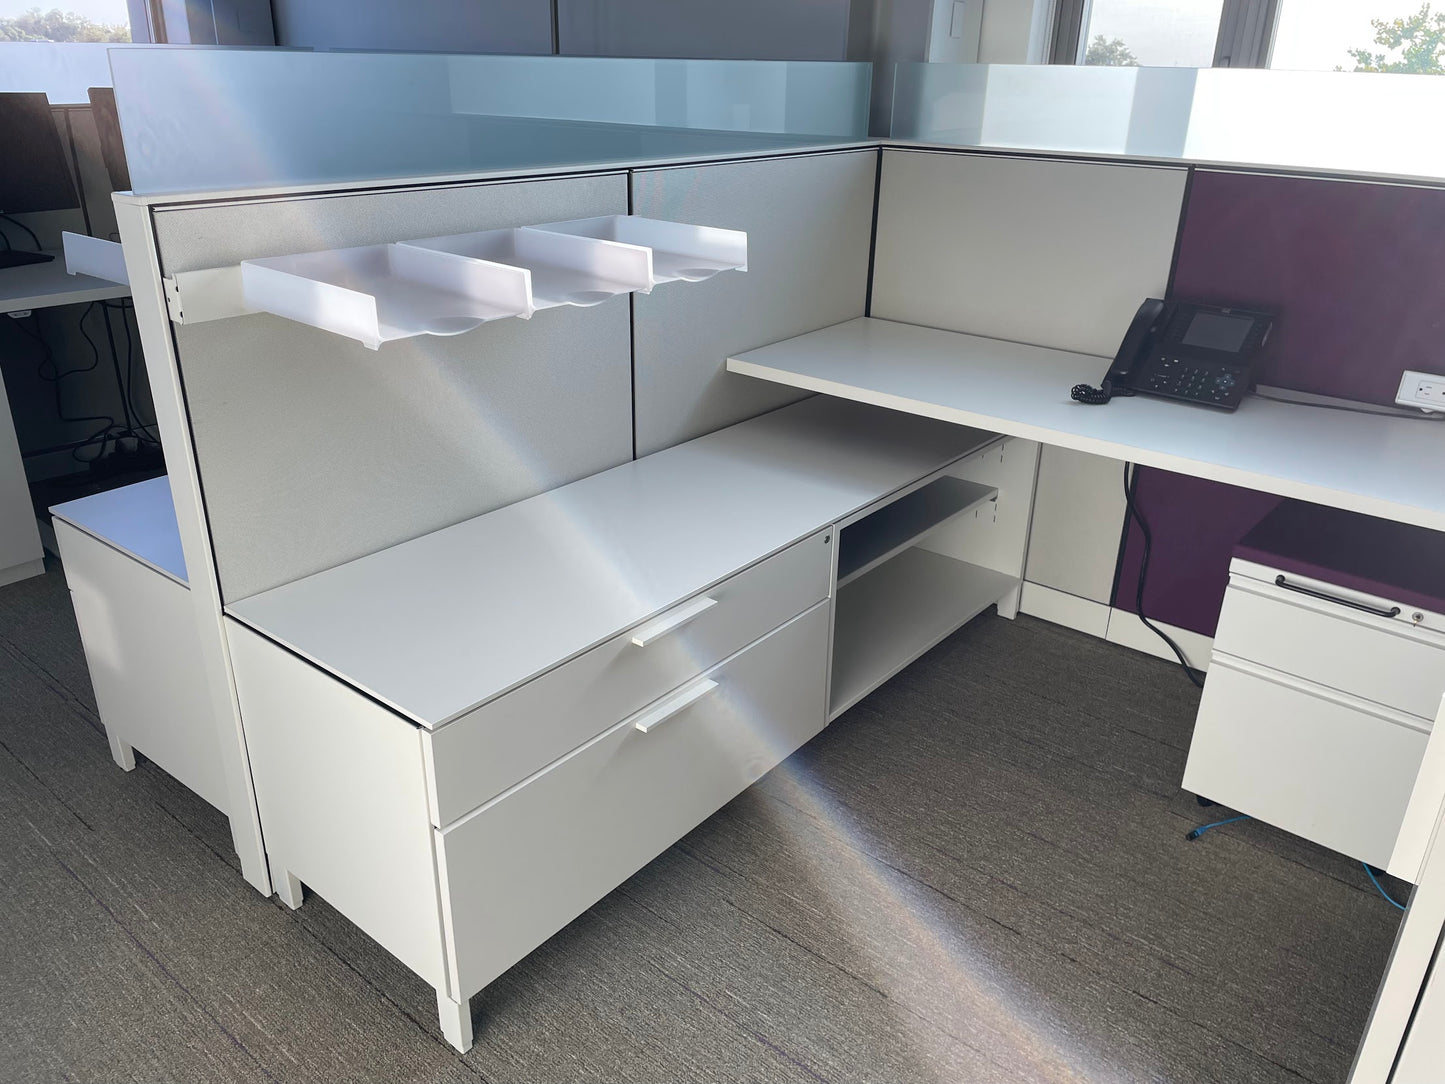 Load image into Gallery viewer, Picture of Herman miller canvas cubicle system with white and purple panels, frosted glass and drawers
